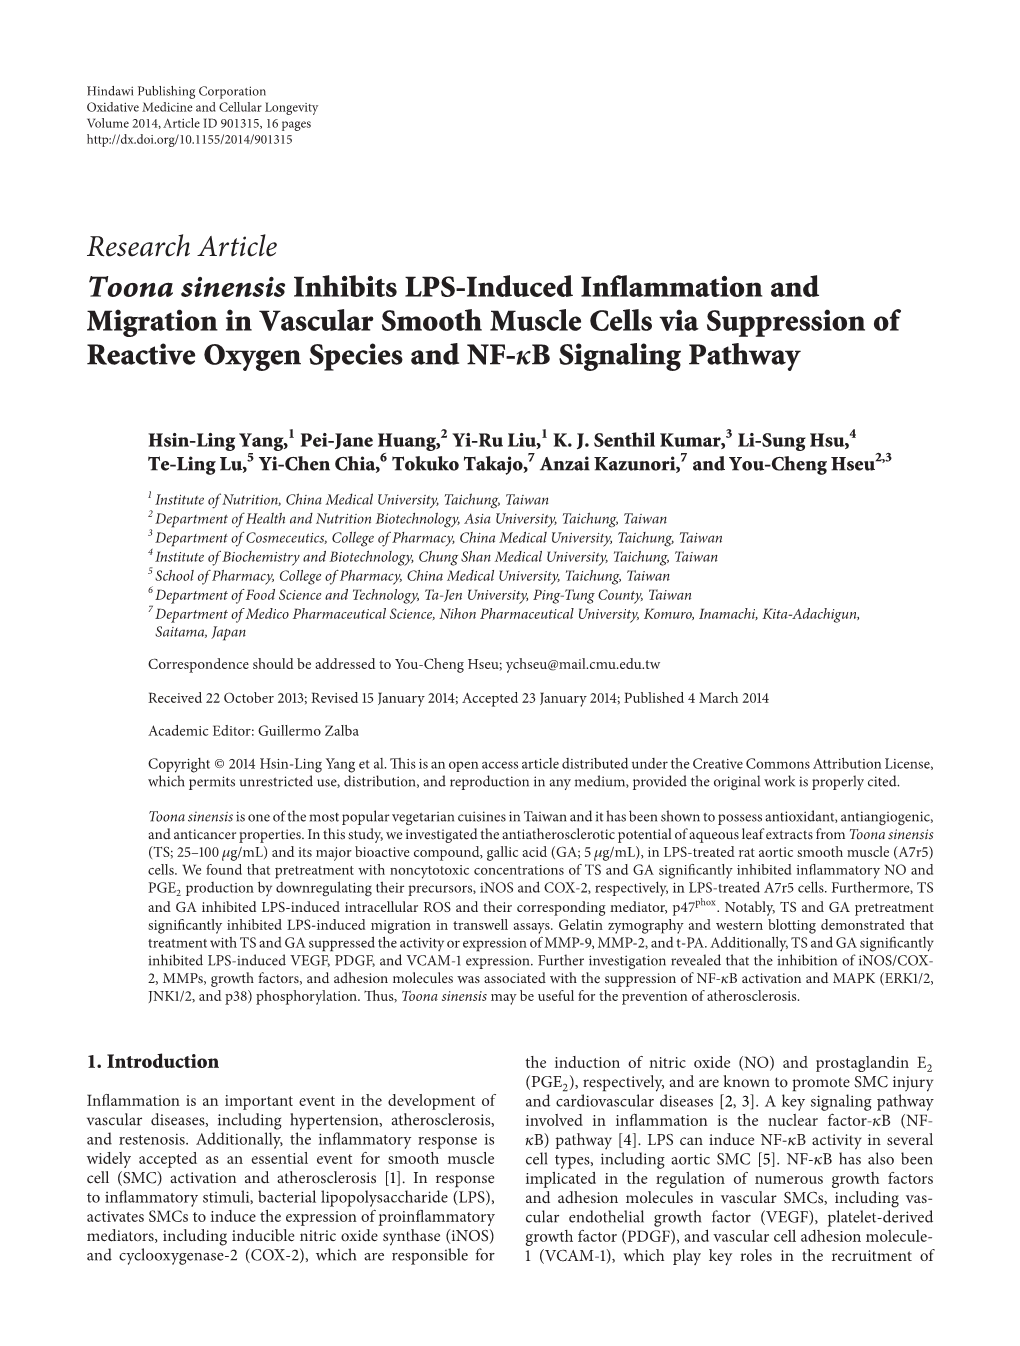 Research Article Toona Sinensis Inhibits LPS